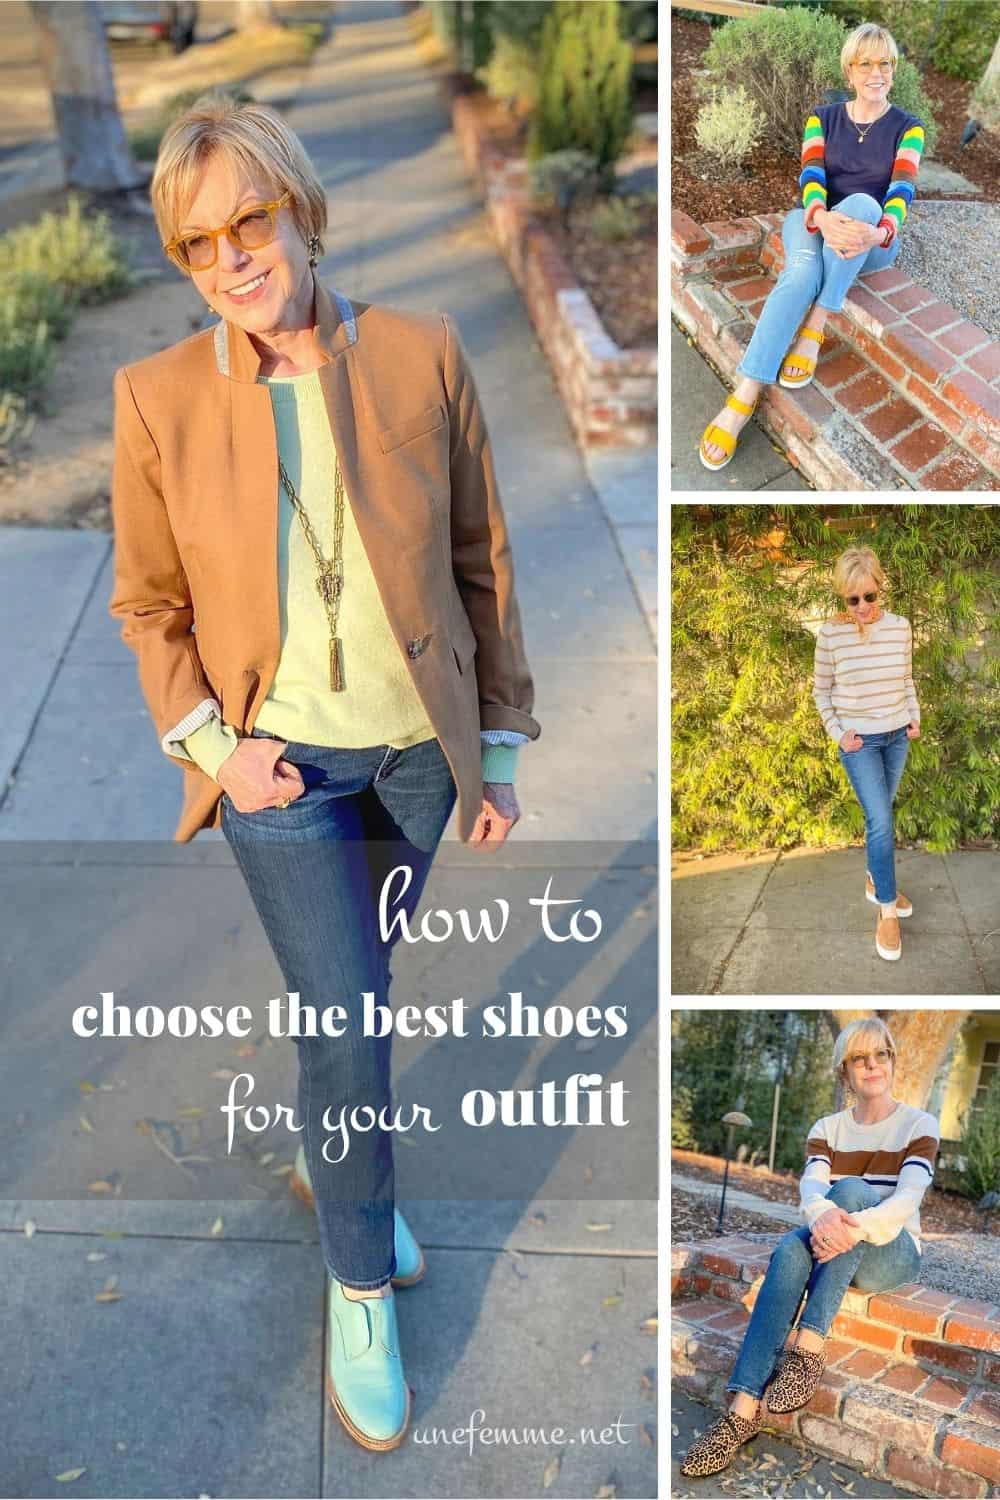 Choose best shoes for outfit